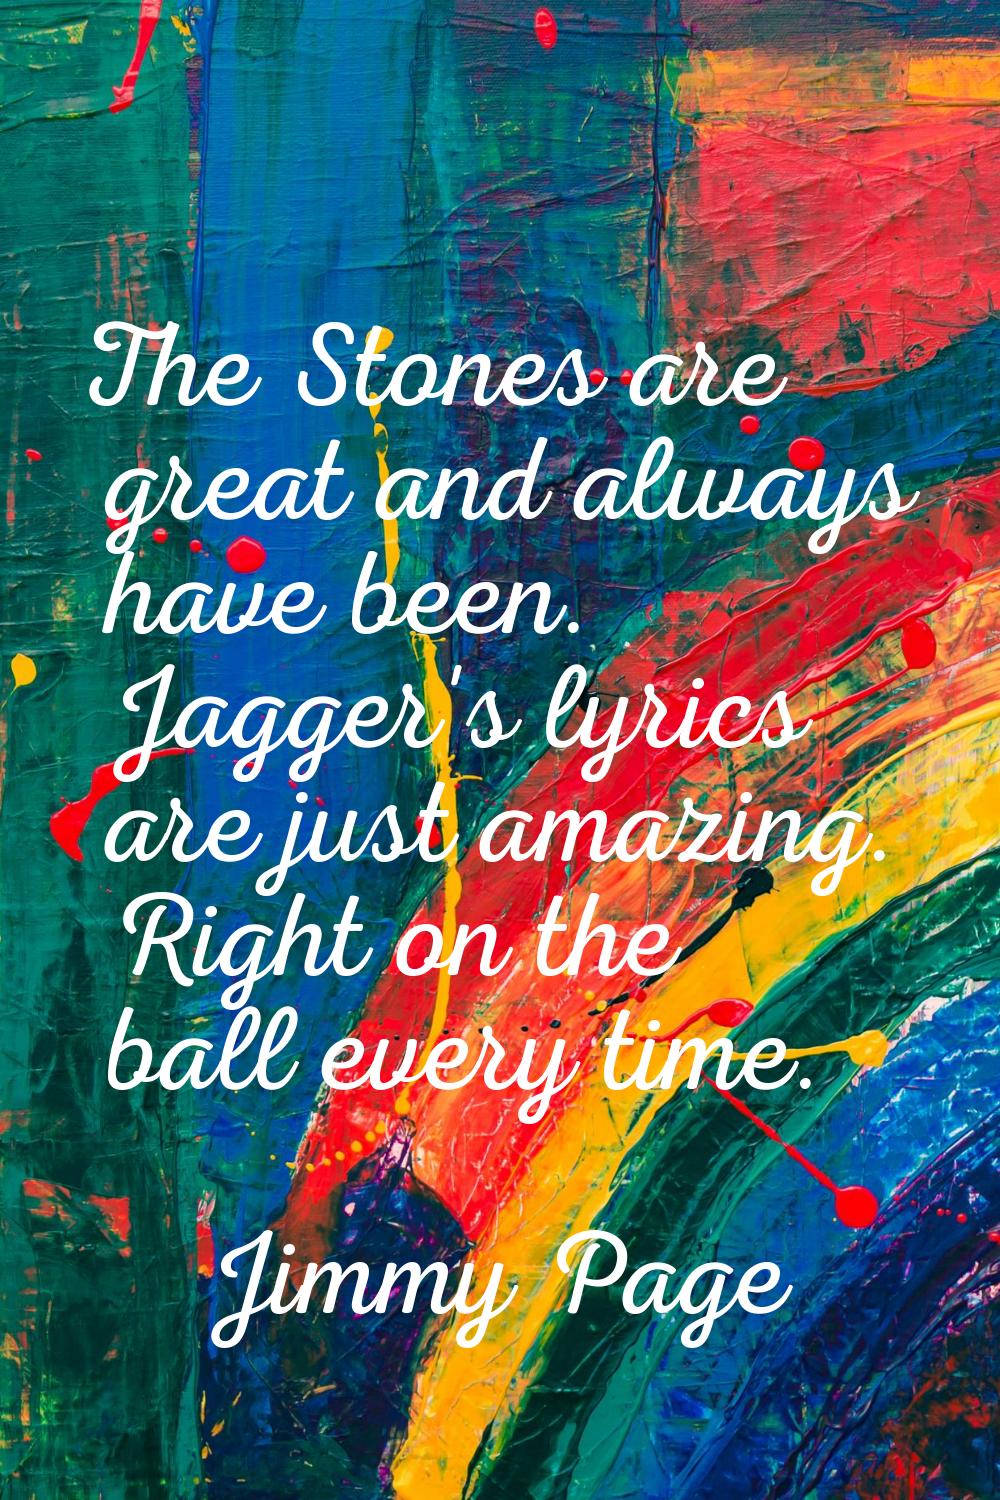 The Stones are great and always have been. Jagger's lyrics are just amazing. Right on the ball ever